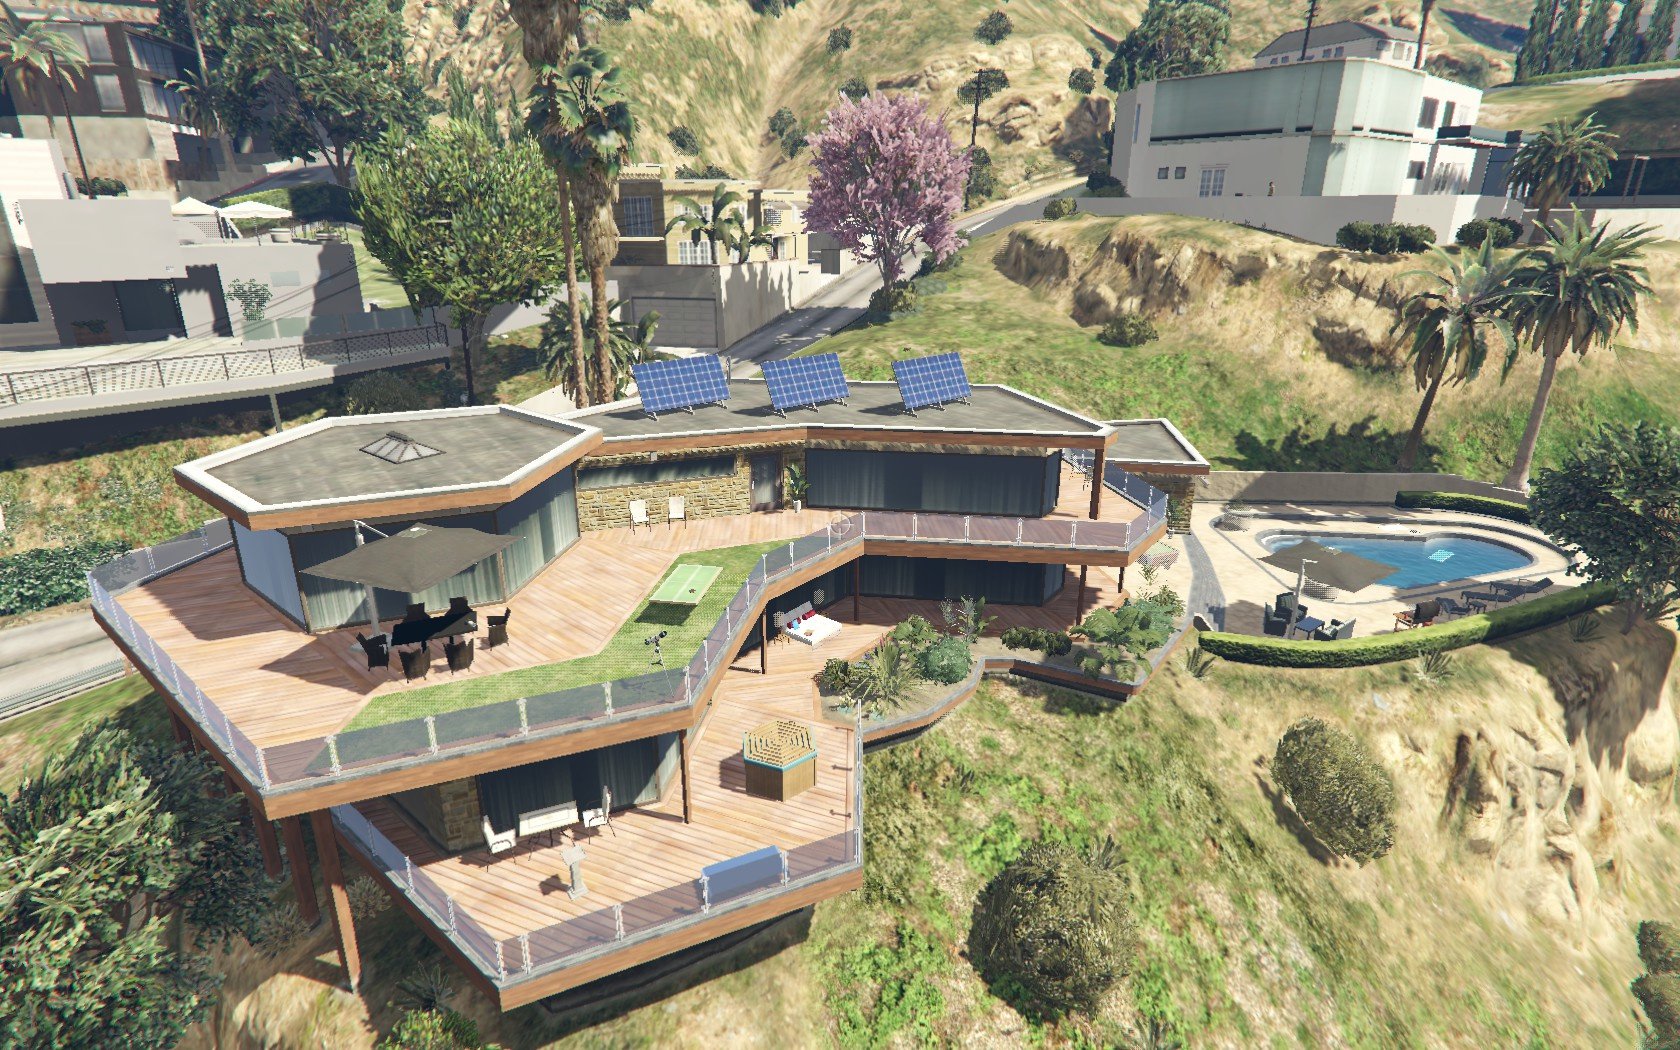 Gta 5 can you buy a house in фото 107